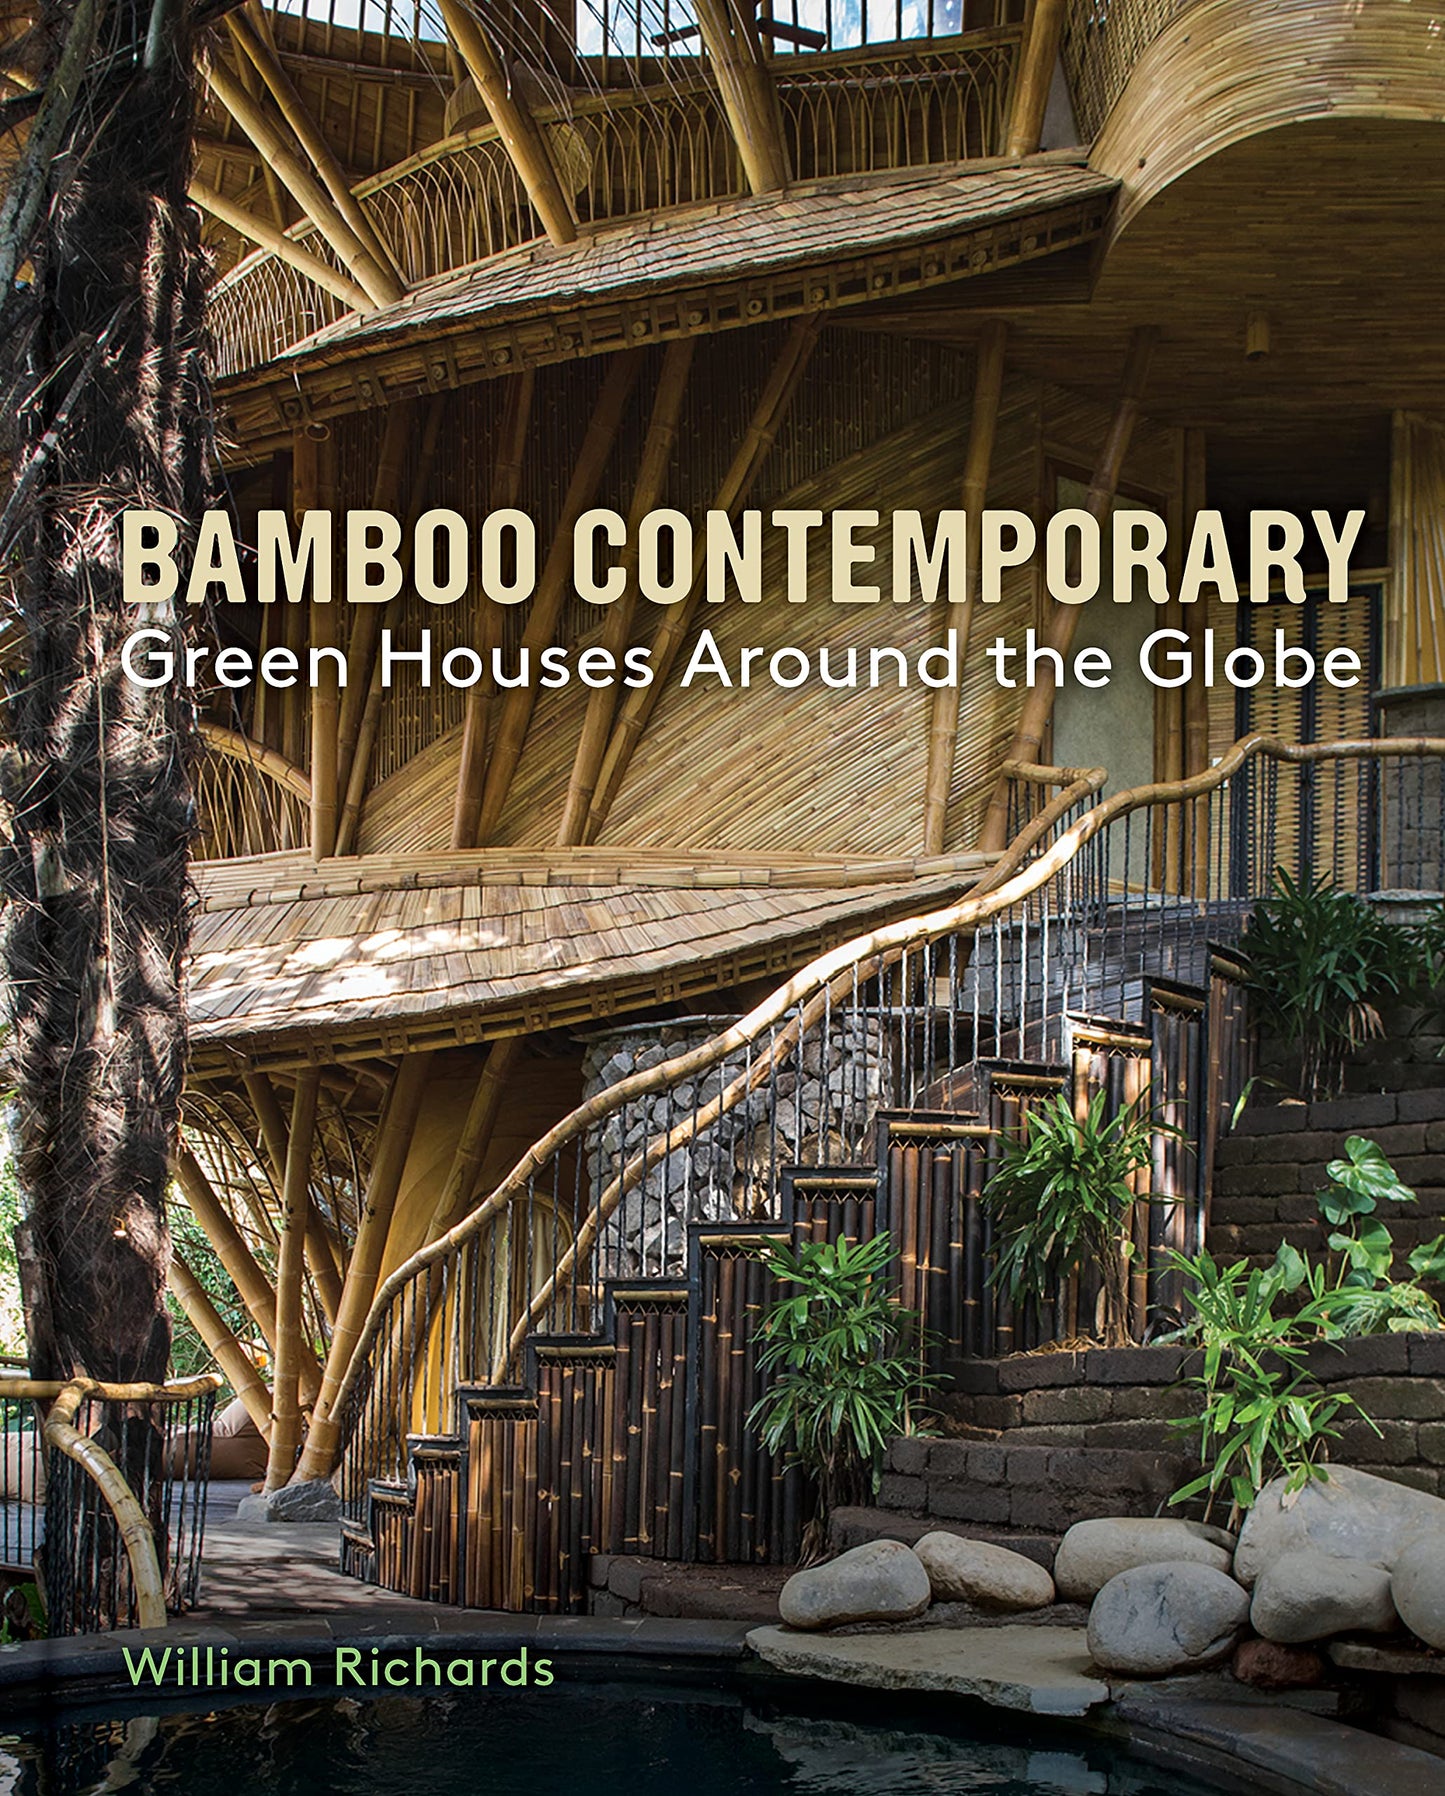 Bamboo Contemporary: Green Houses Around the Globe